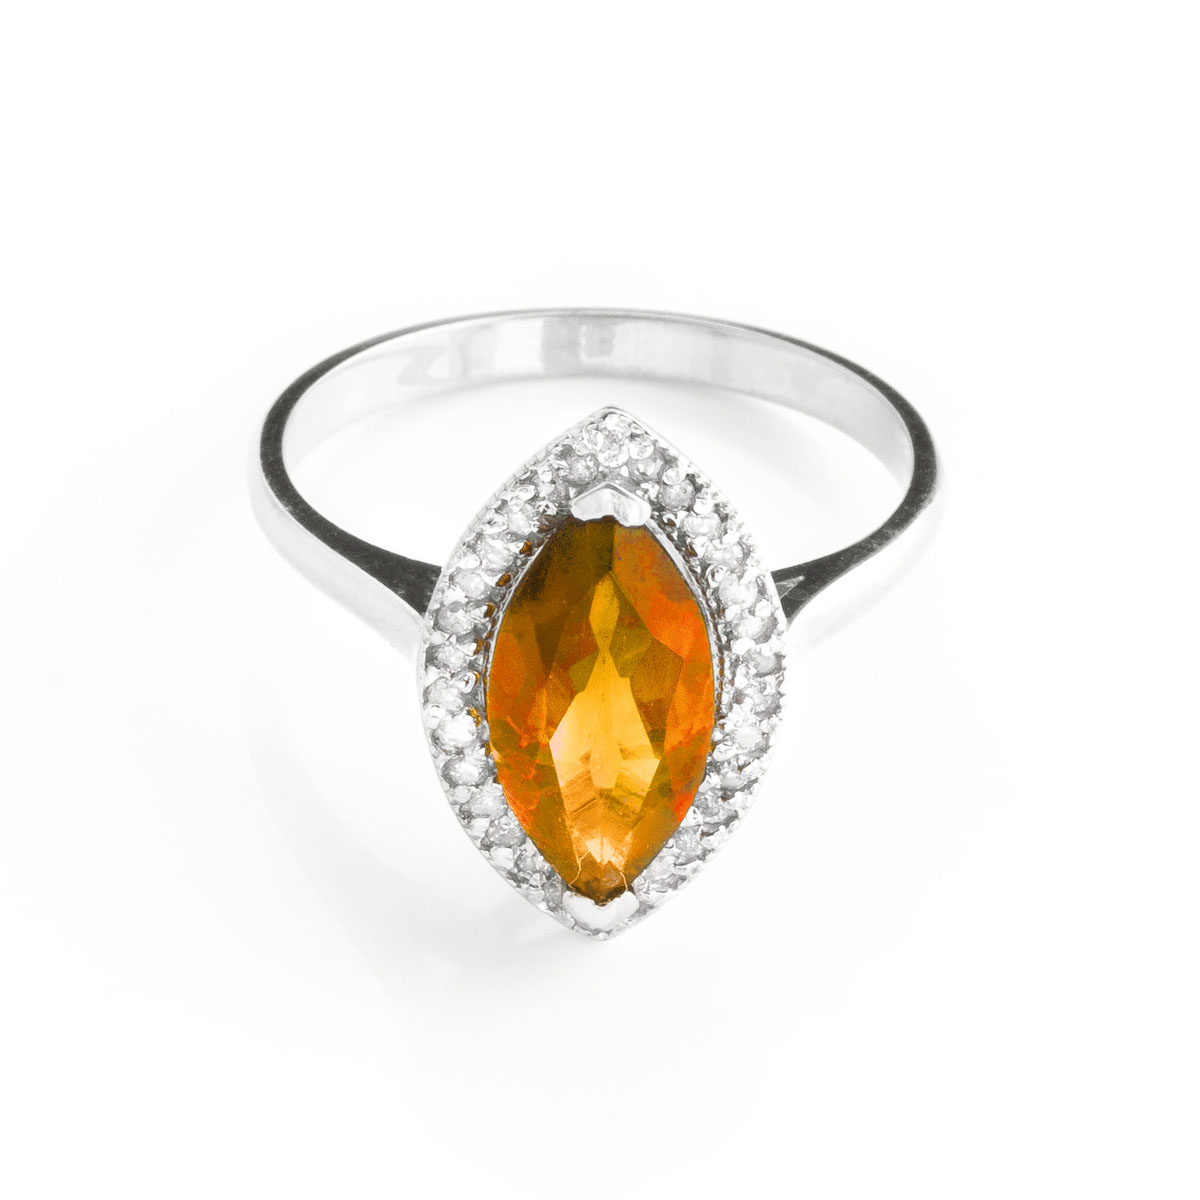 Citrine Halo Ring 1.8 ctw in 9ct White Gold